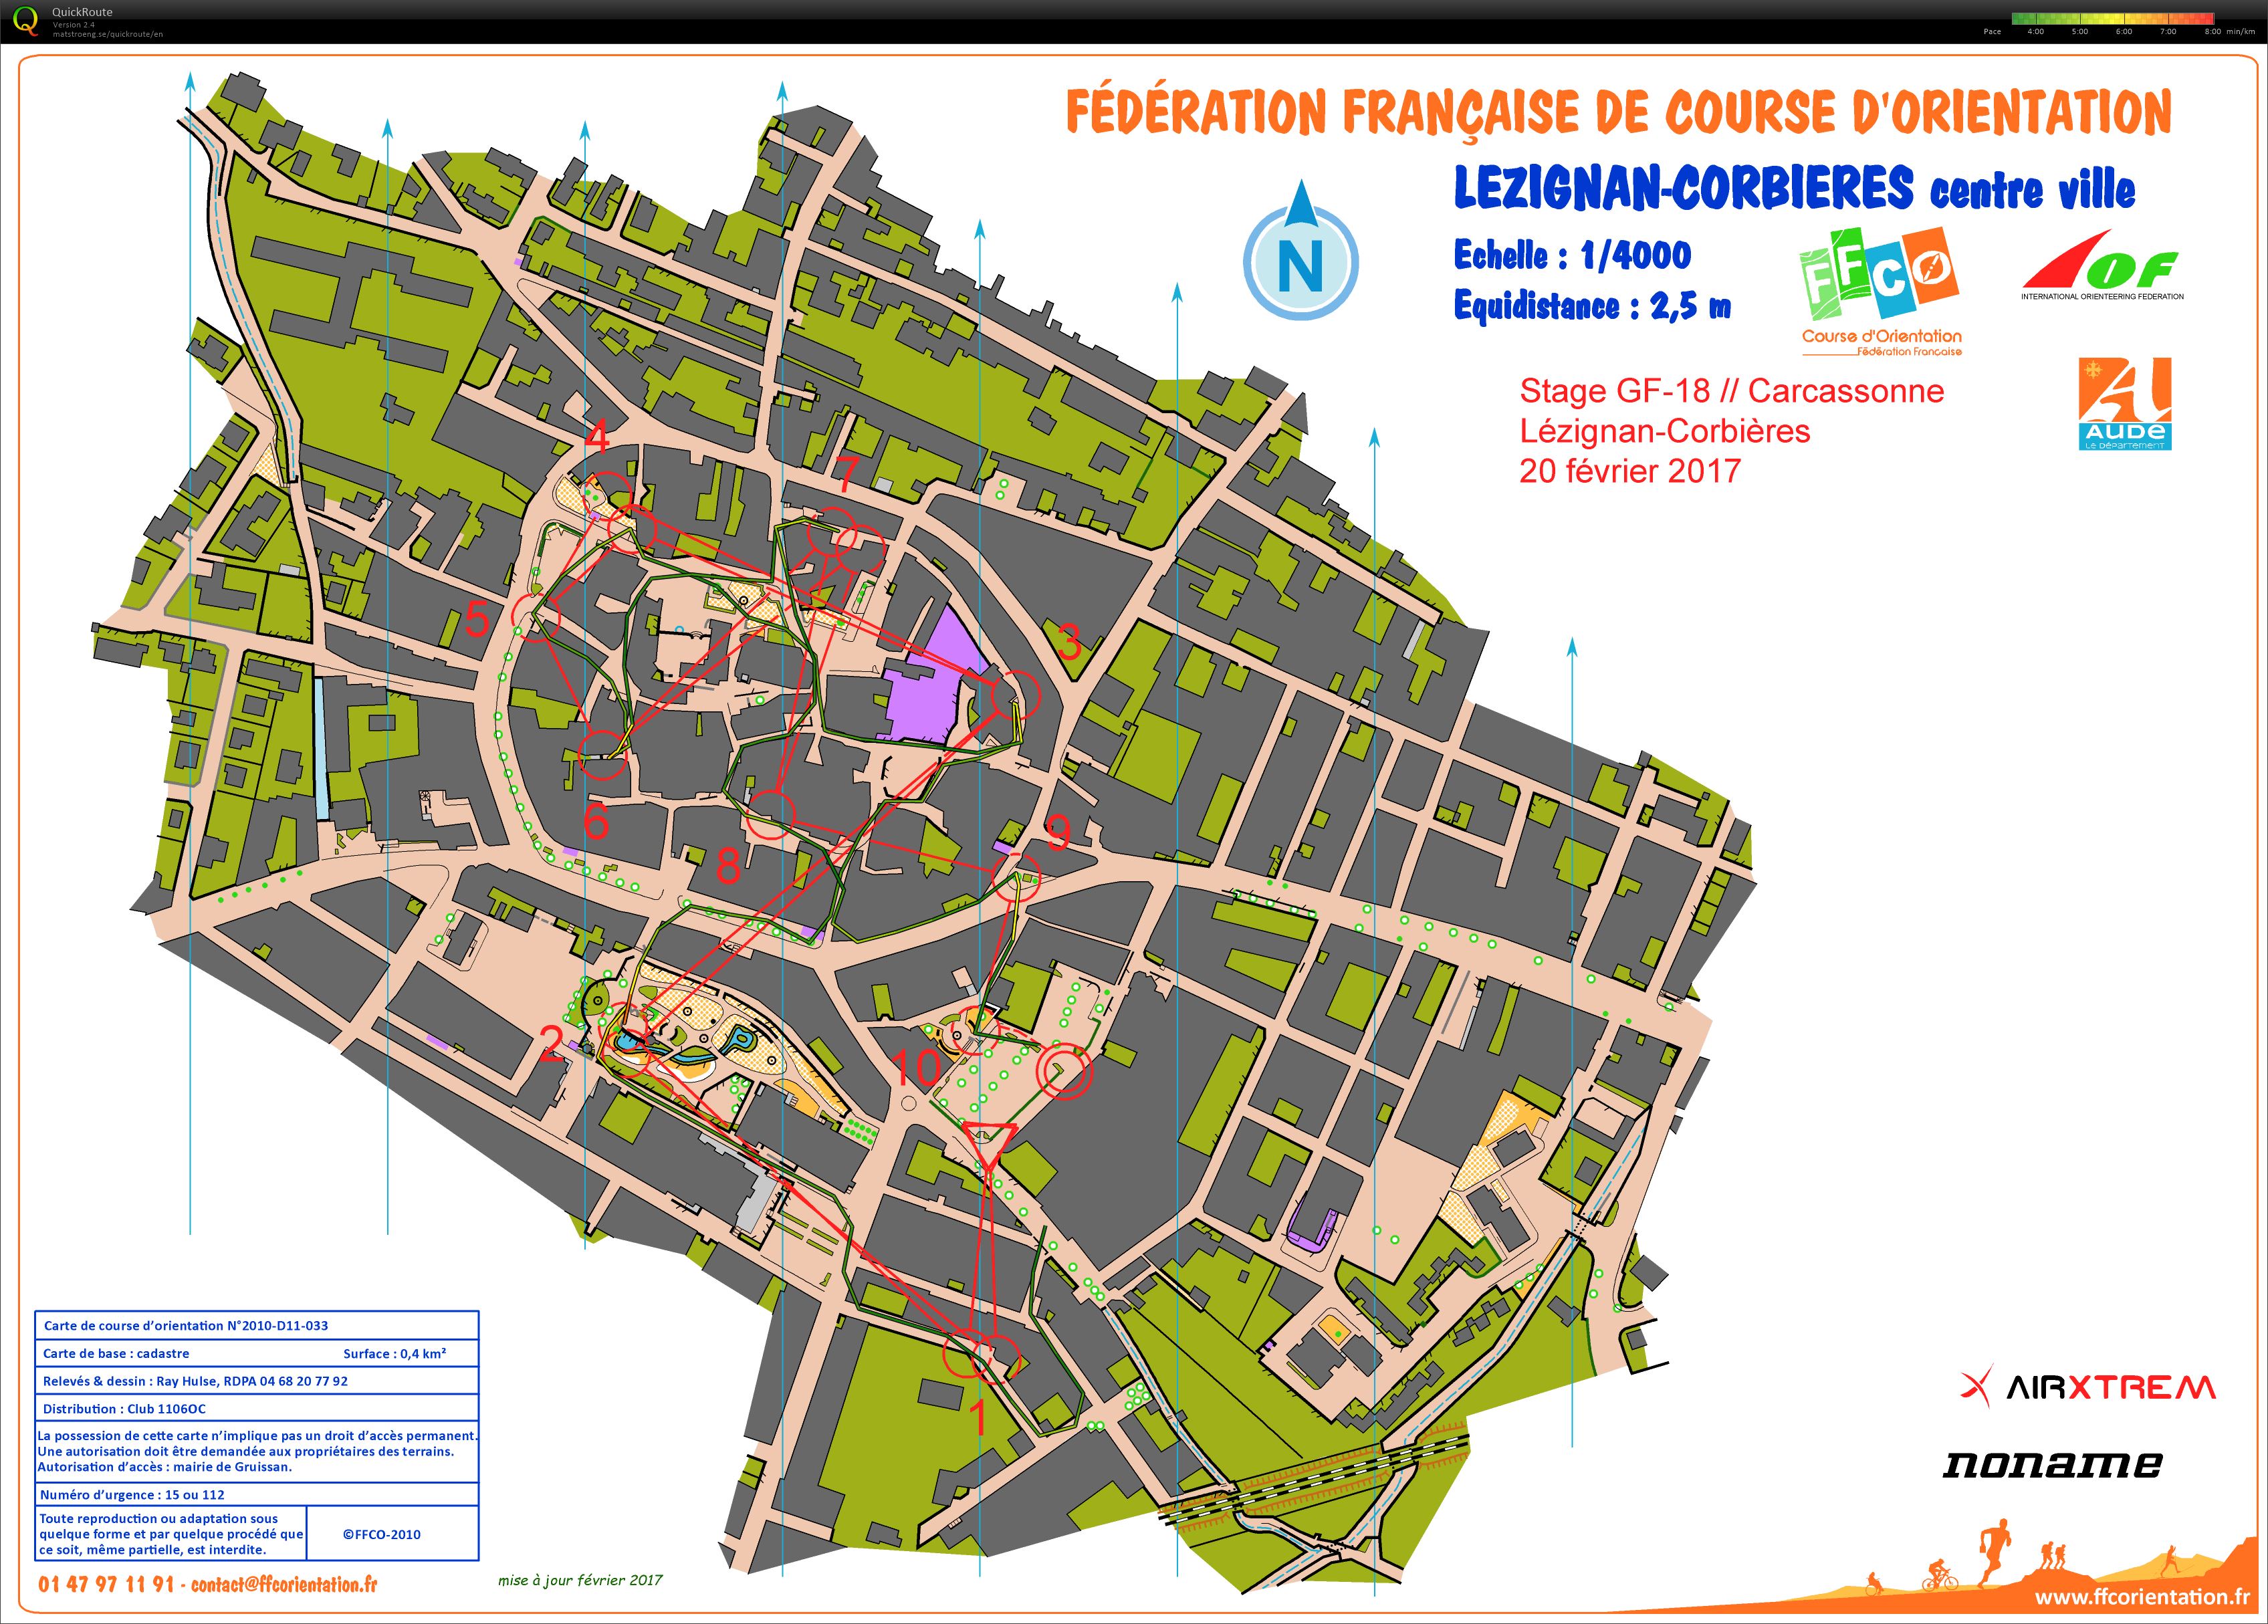 Manche 1 (chasse) relais sprint stage gf-18 Carcassonne (20.02.2017)